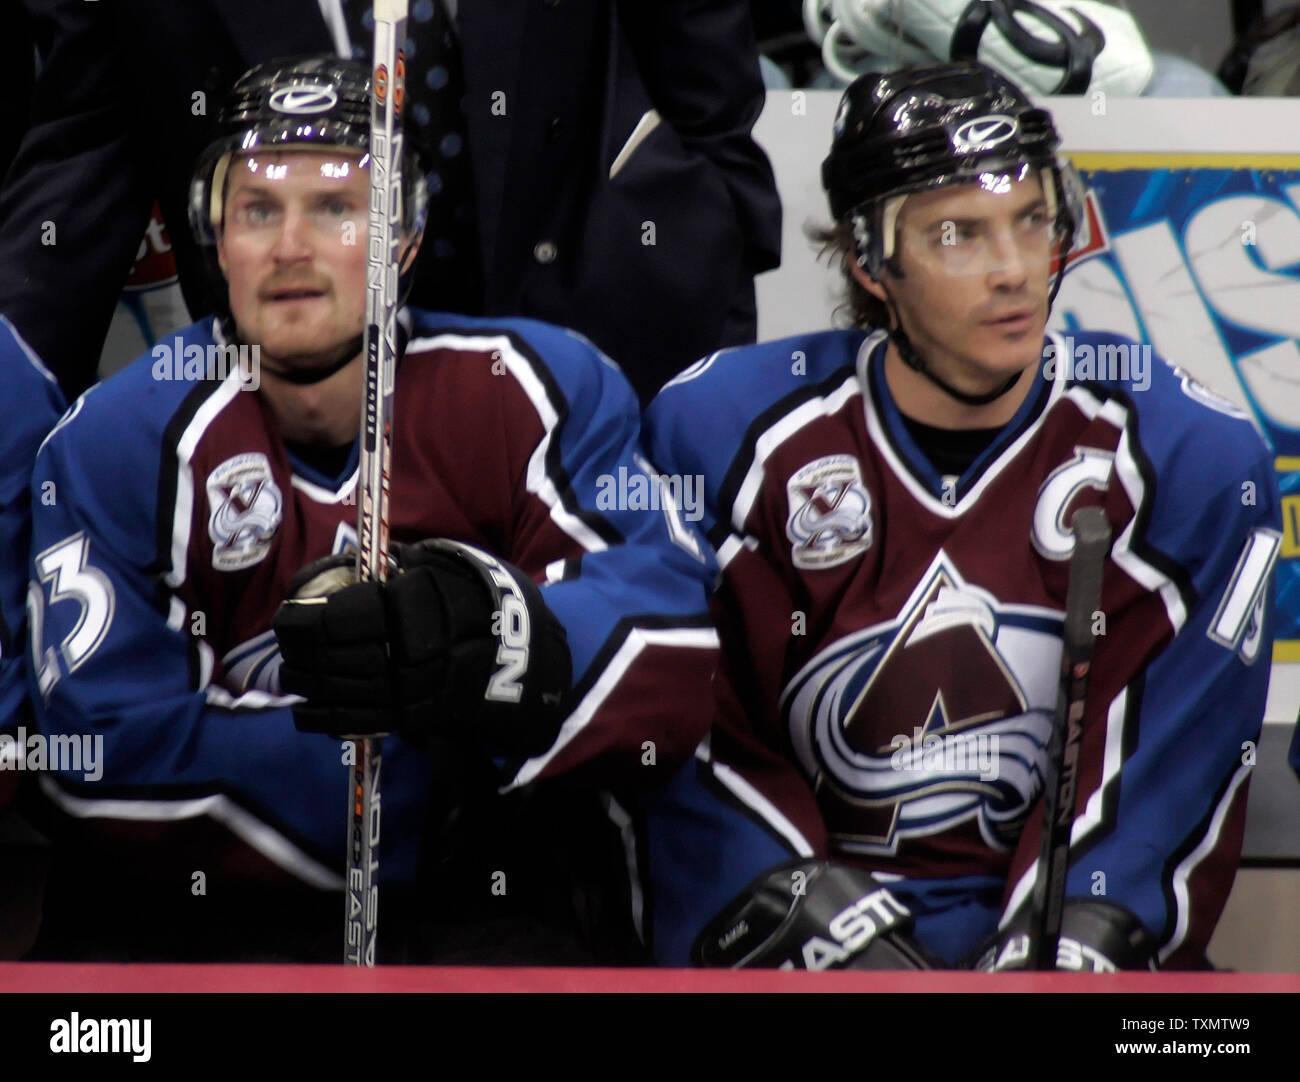 L-R) Colorado Avalanche players Milan Hejduk, John-Michael Liles, Curtis  Leschyshyn, and head coach Joel Quenneville model four generations of NHL Avalanche  jerseys at the Pepsi Center in Denver on September 12, 2007.